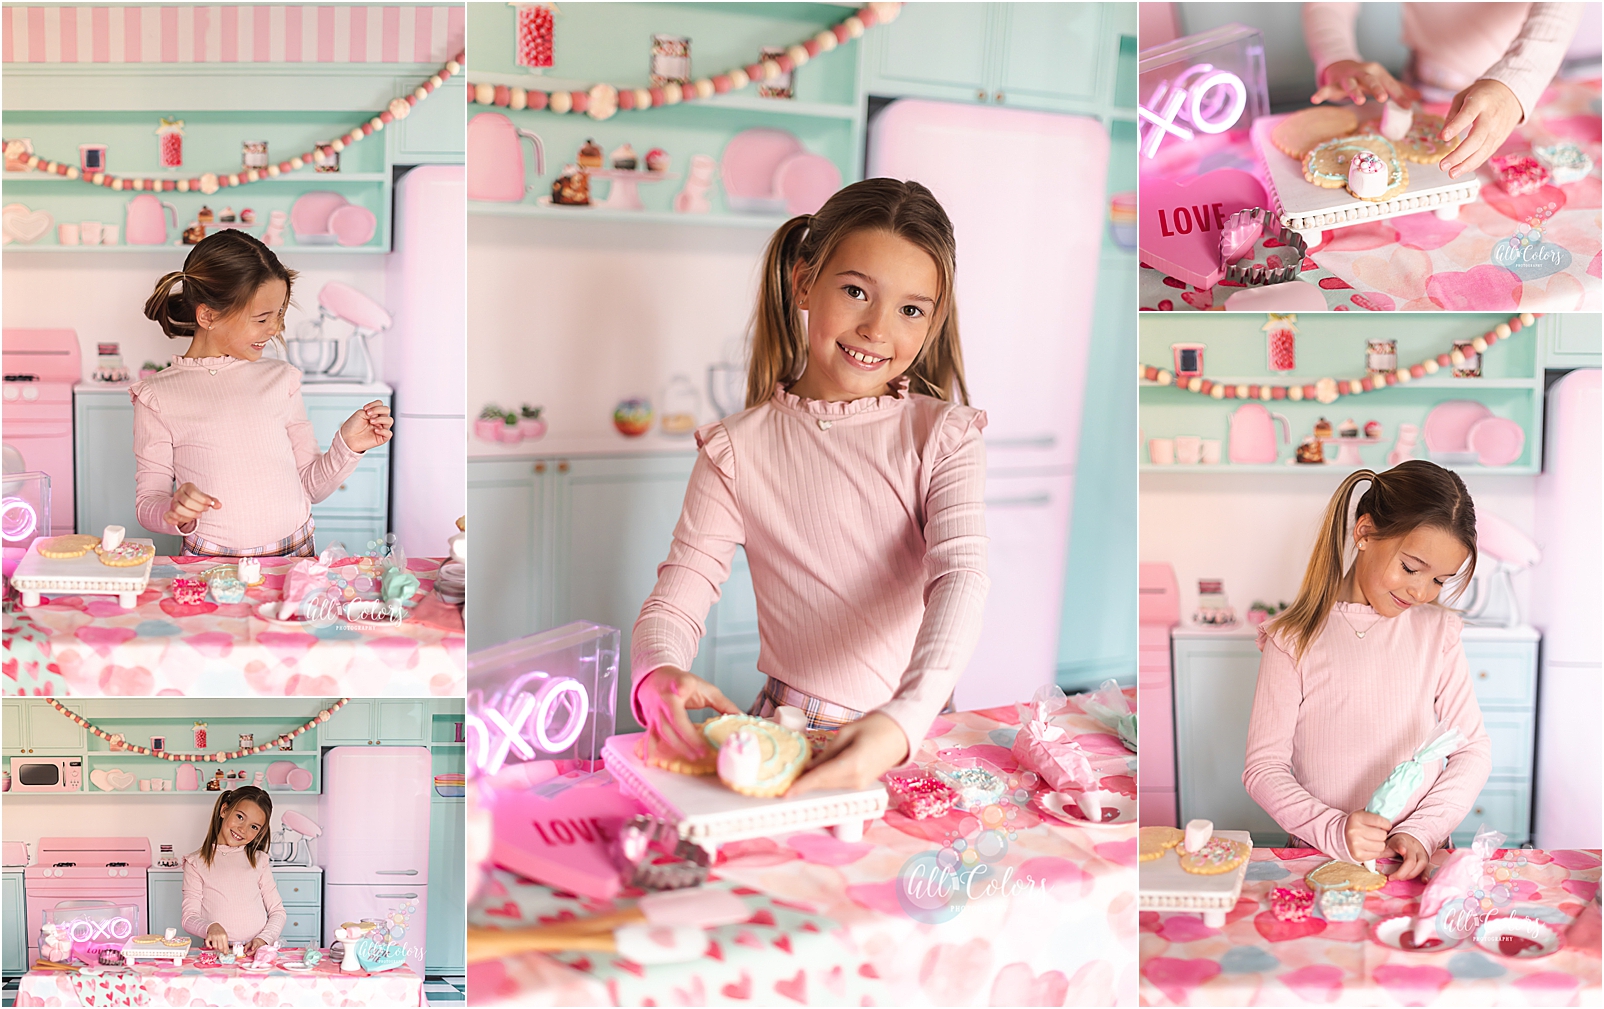 collage of photos of a girl decorating cookies for Valentine's Day.